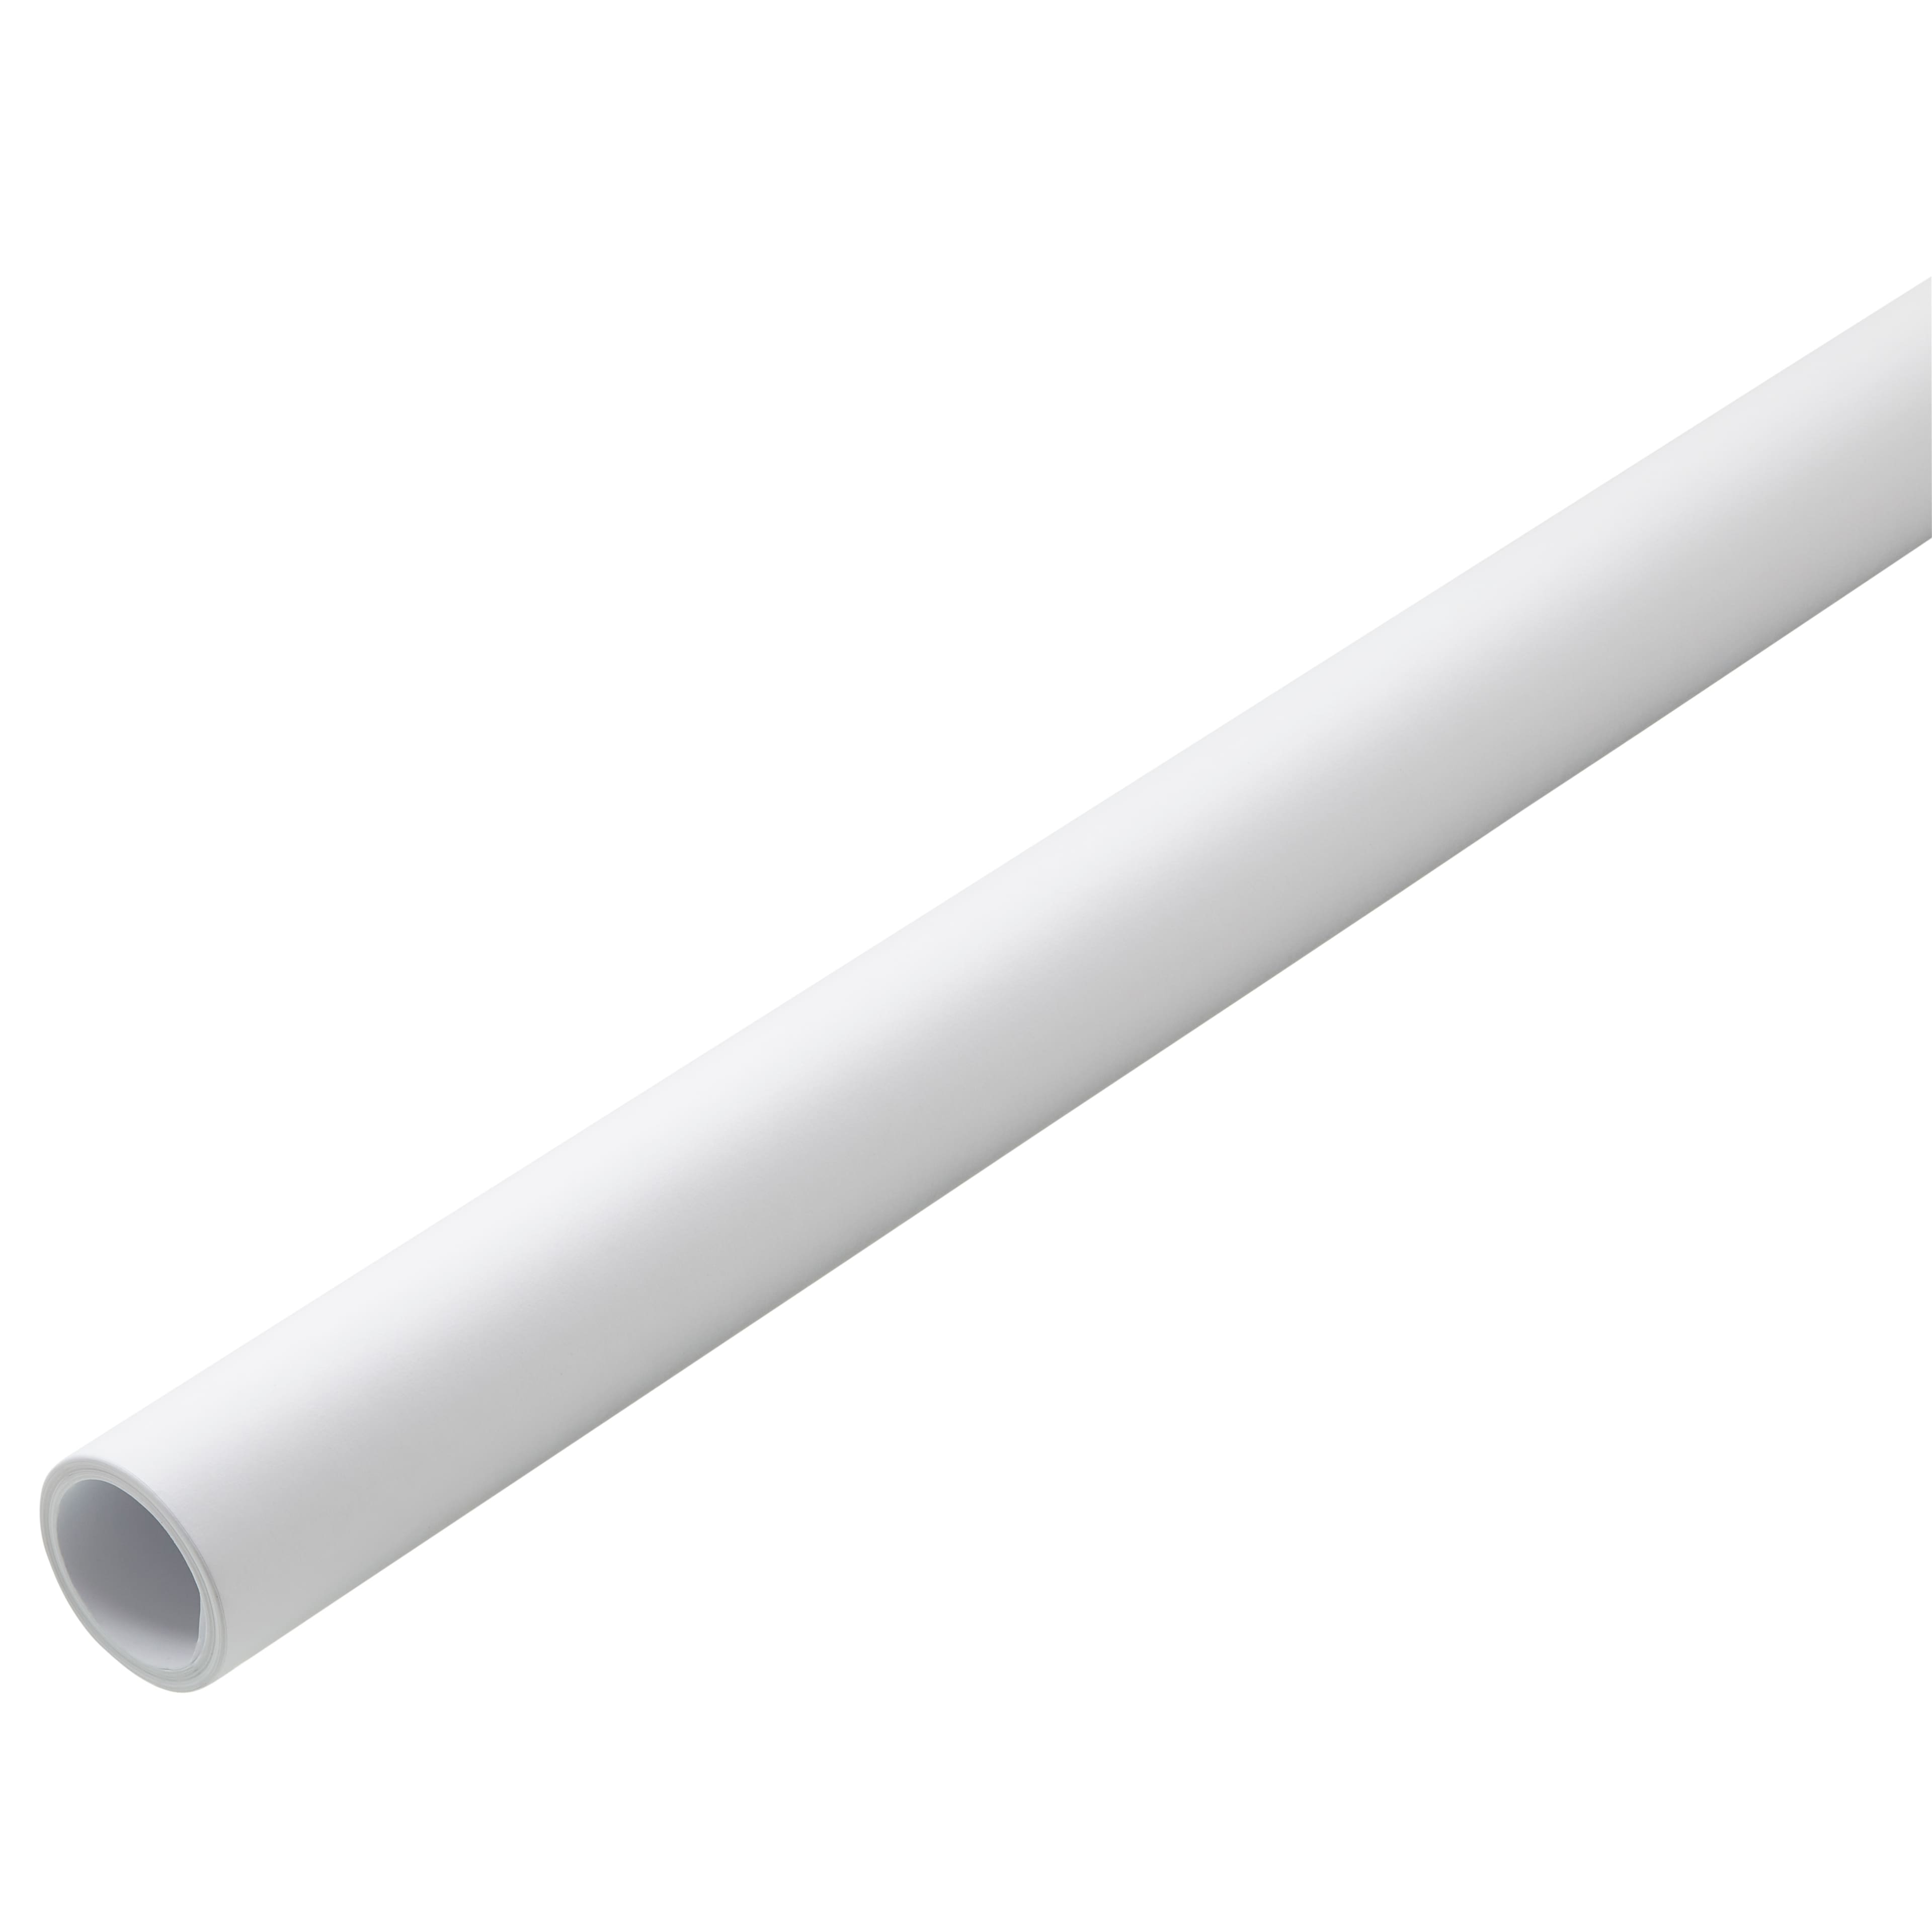 Bulletin Board Paper Rolls by Pacon Corporation PACP57505